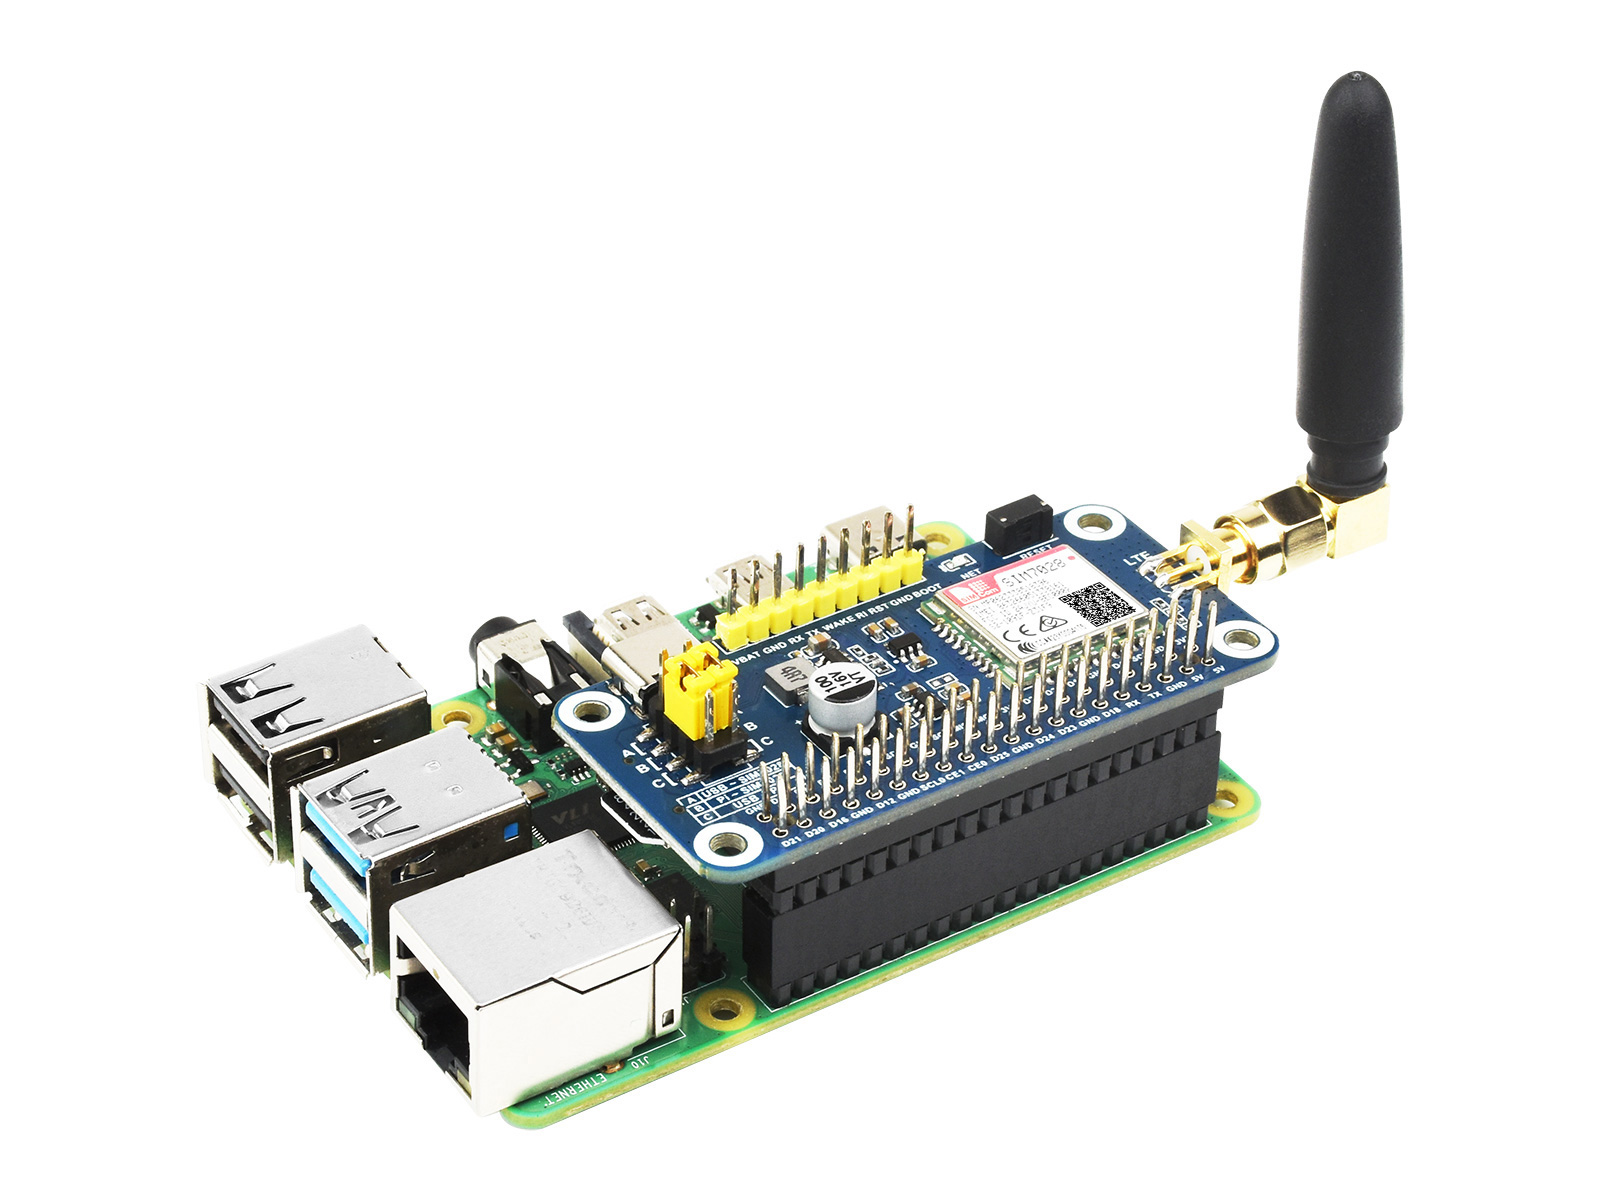 SIM7028 NB-IoT HAT for Raspberry Pi, Supports Global Band NB-IoT 